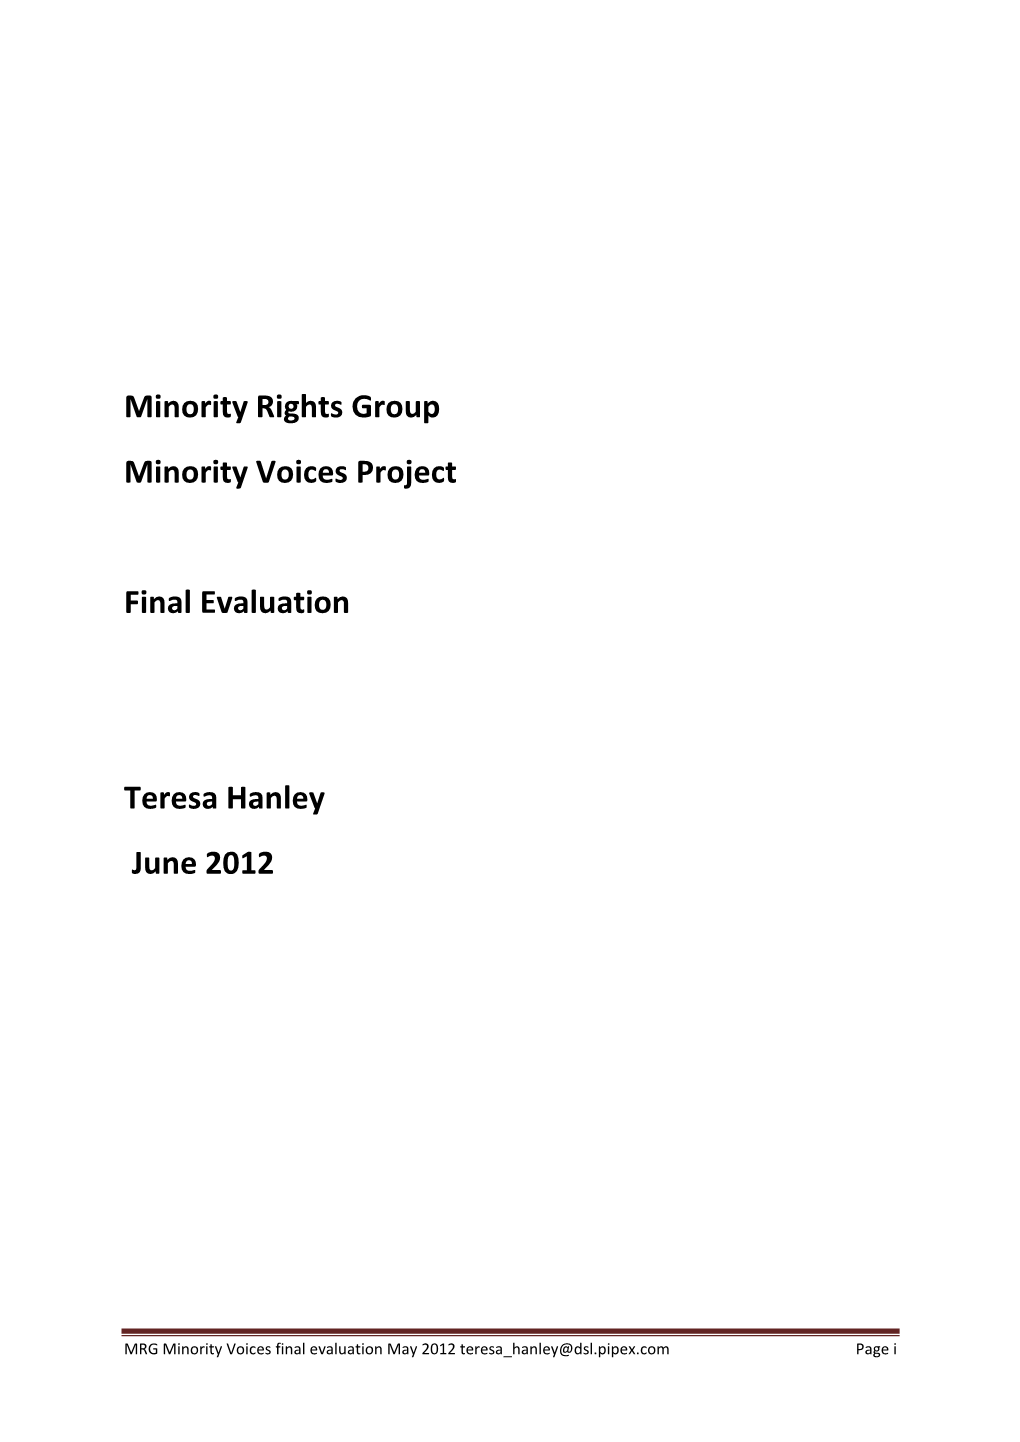 Minority Rights Group Minority Voices Project Final Evaluation Teresa